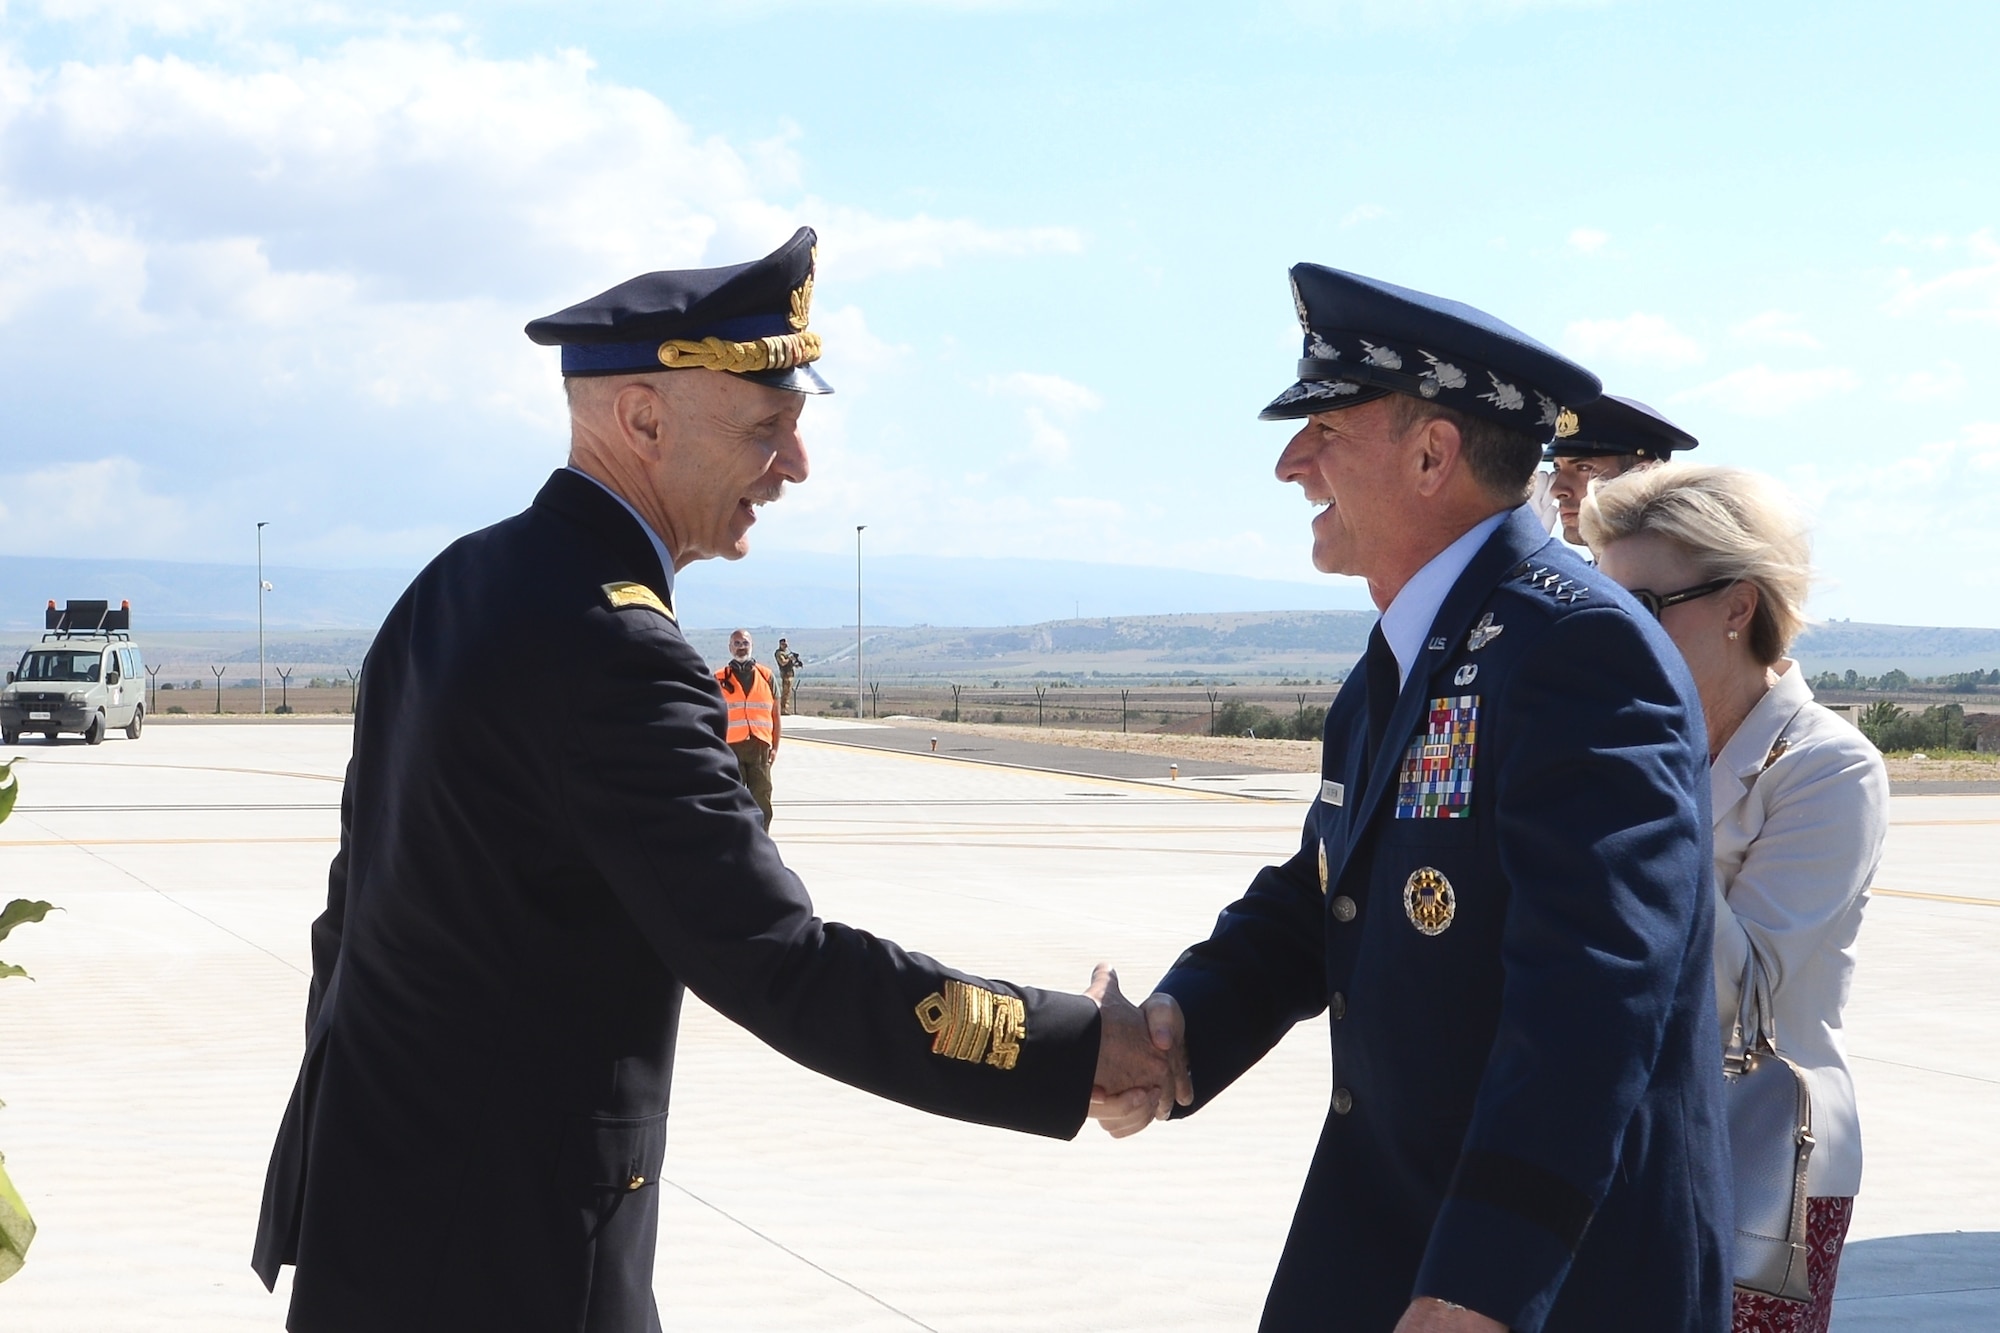 U.S. Chief of Staff of the Air Force Gen. David L. Goldfein is greeted by Italian Air Force Chief of Staff Lt. Gen. Enzo Vecciarelli upon his arrival at Amendola Air Base, Italy, July 7, 2018. Goldfein visited several air bases across Italy July 5-9, where he met with military and political leaders to strengthen international partnerships. (Courtesy photo)